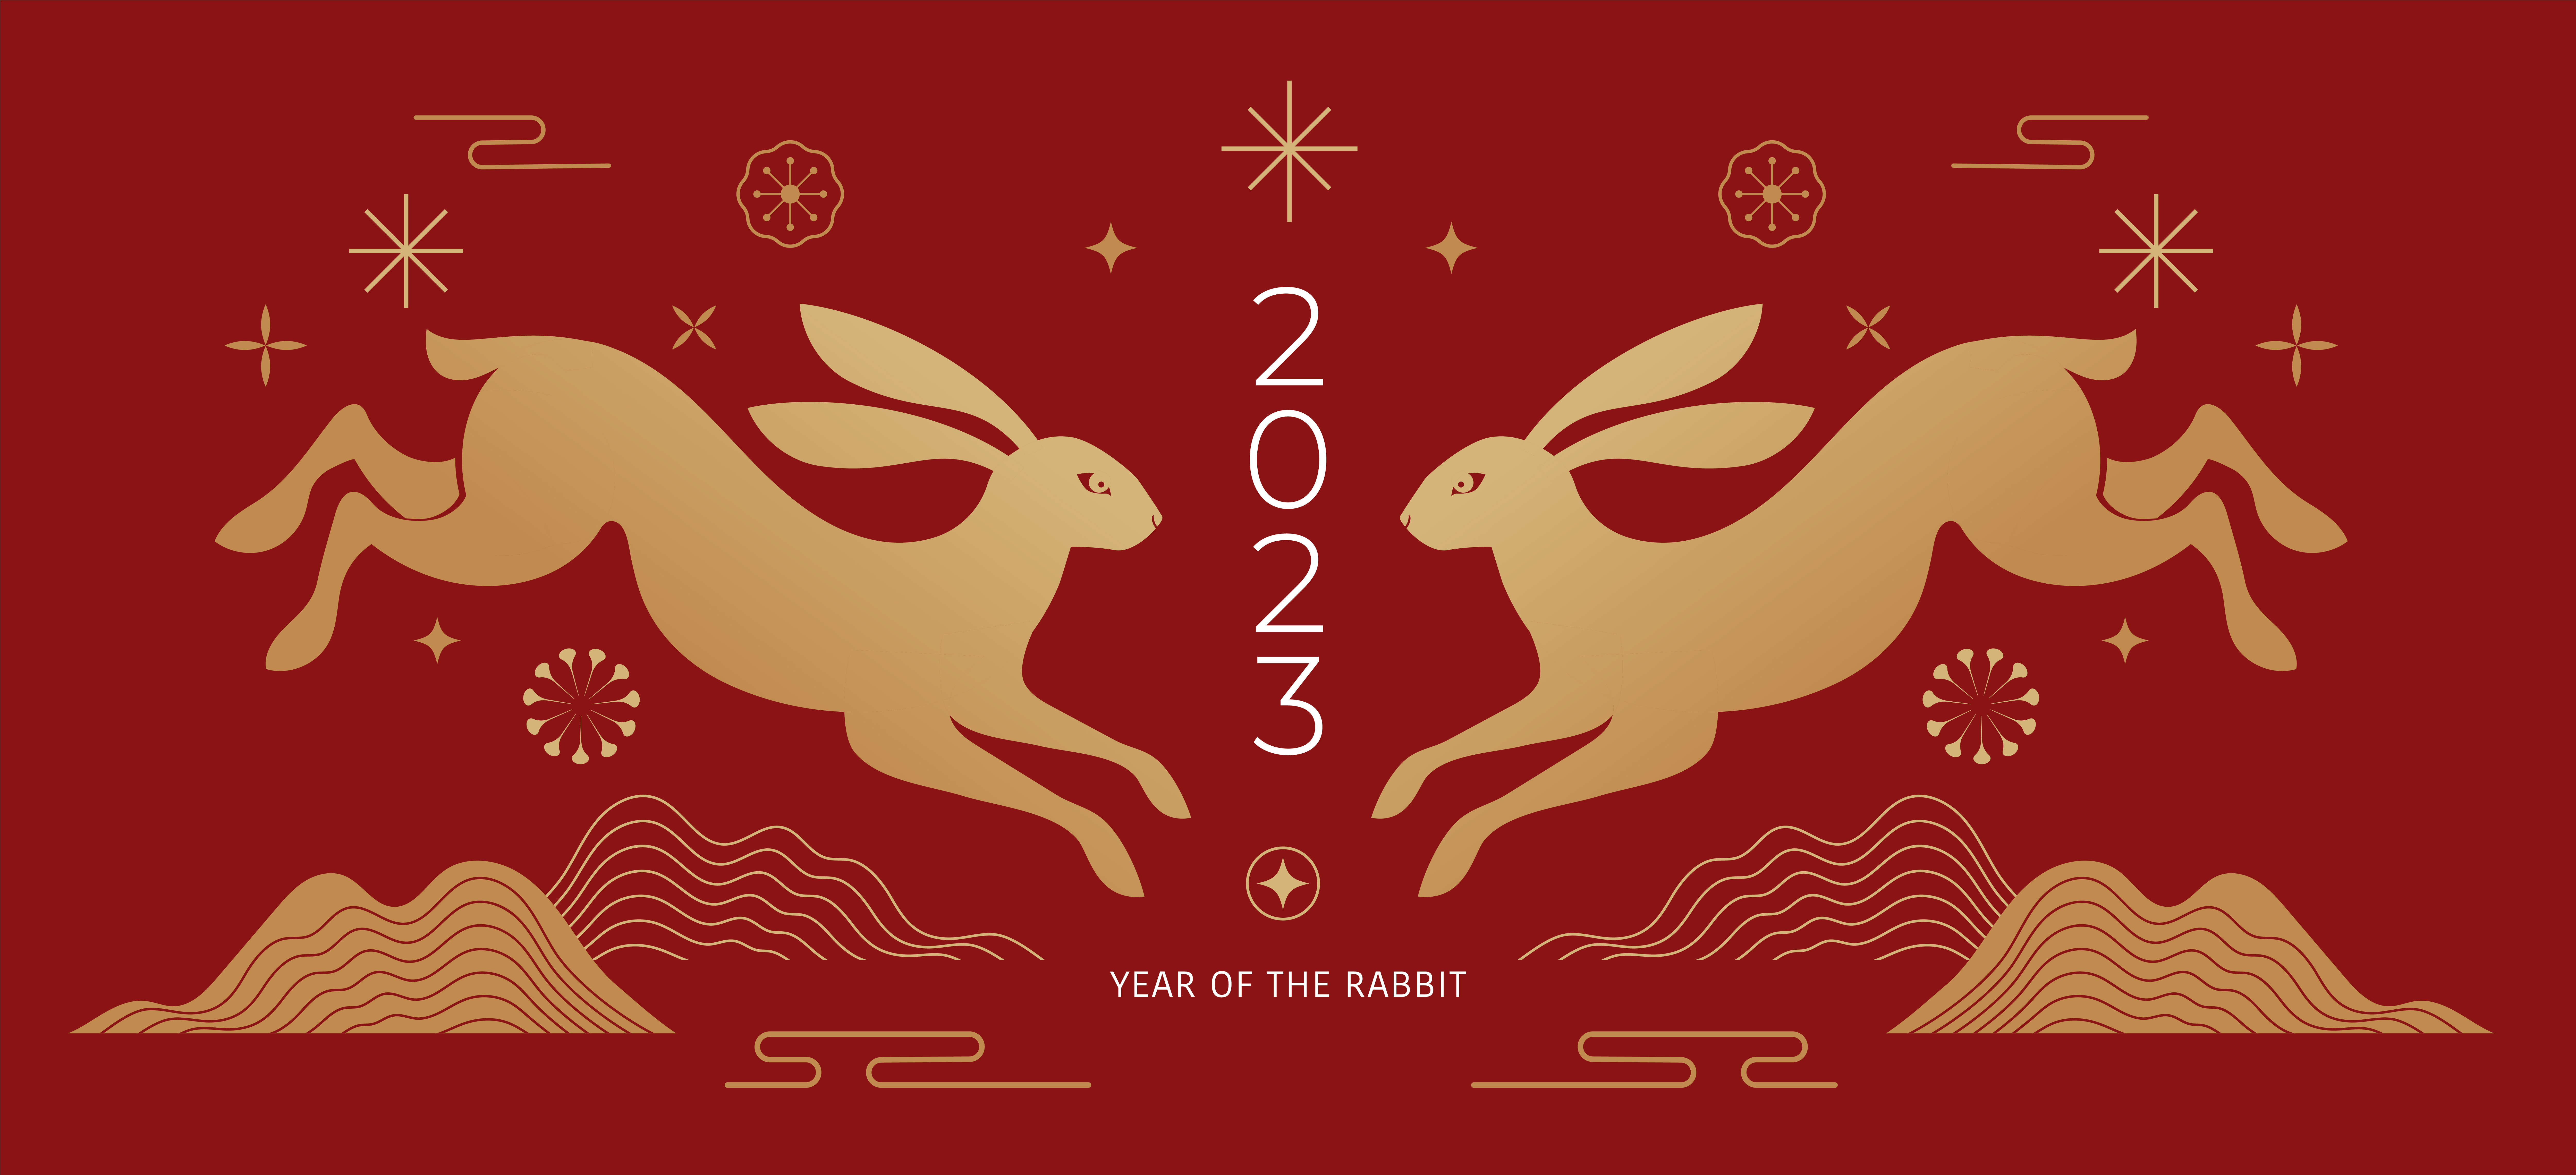 2023 year of the rabbit image